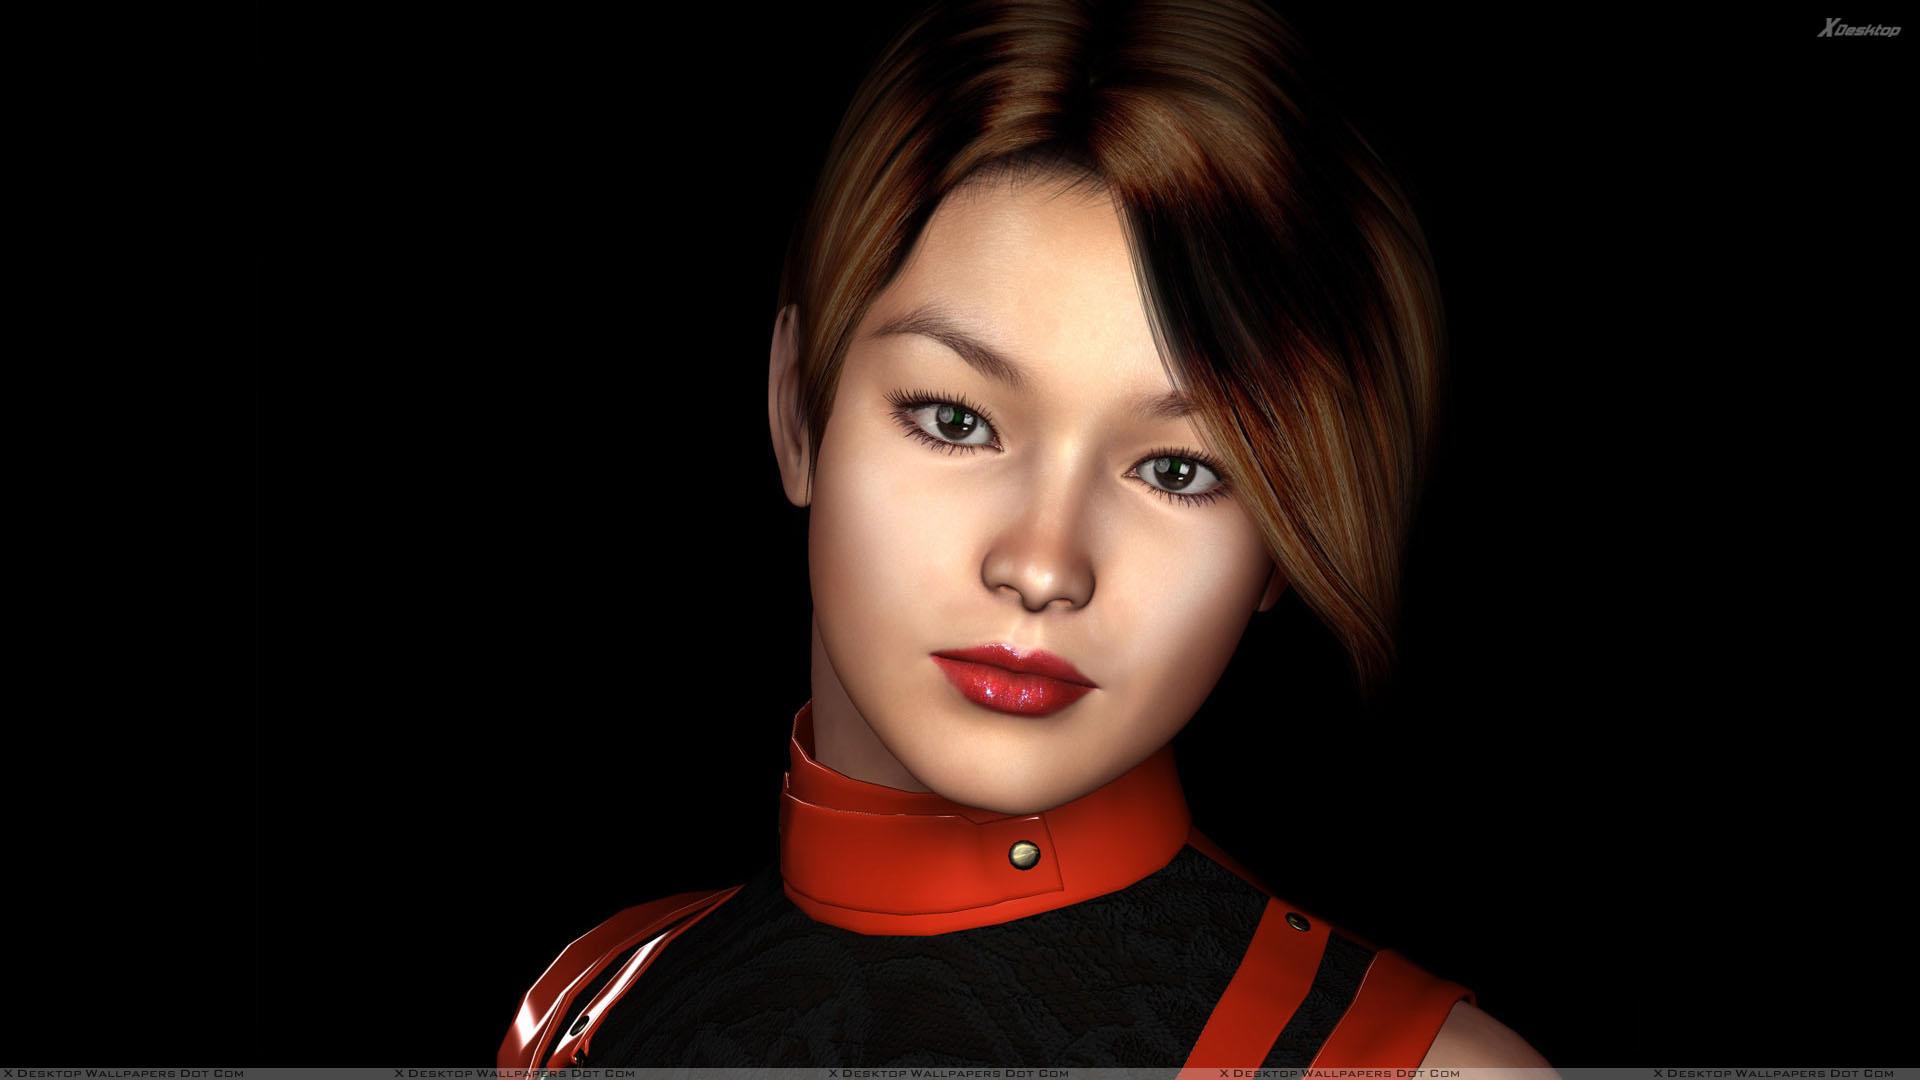 3D Girl Red Lips And Cute Face Closeup N Black Background Wallpaper